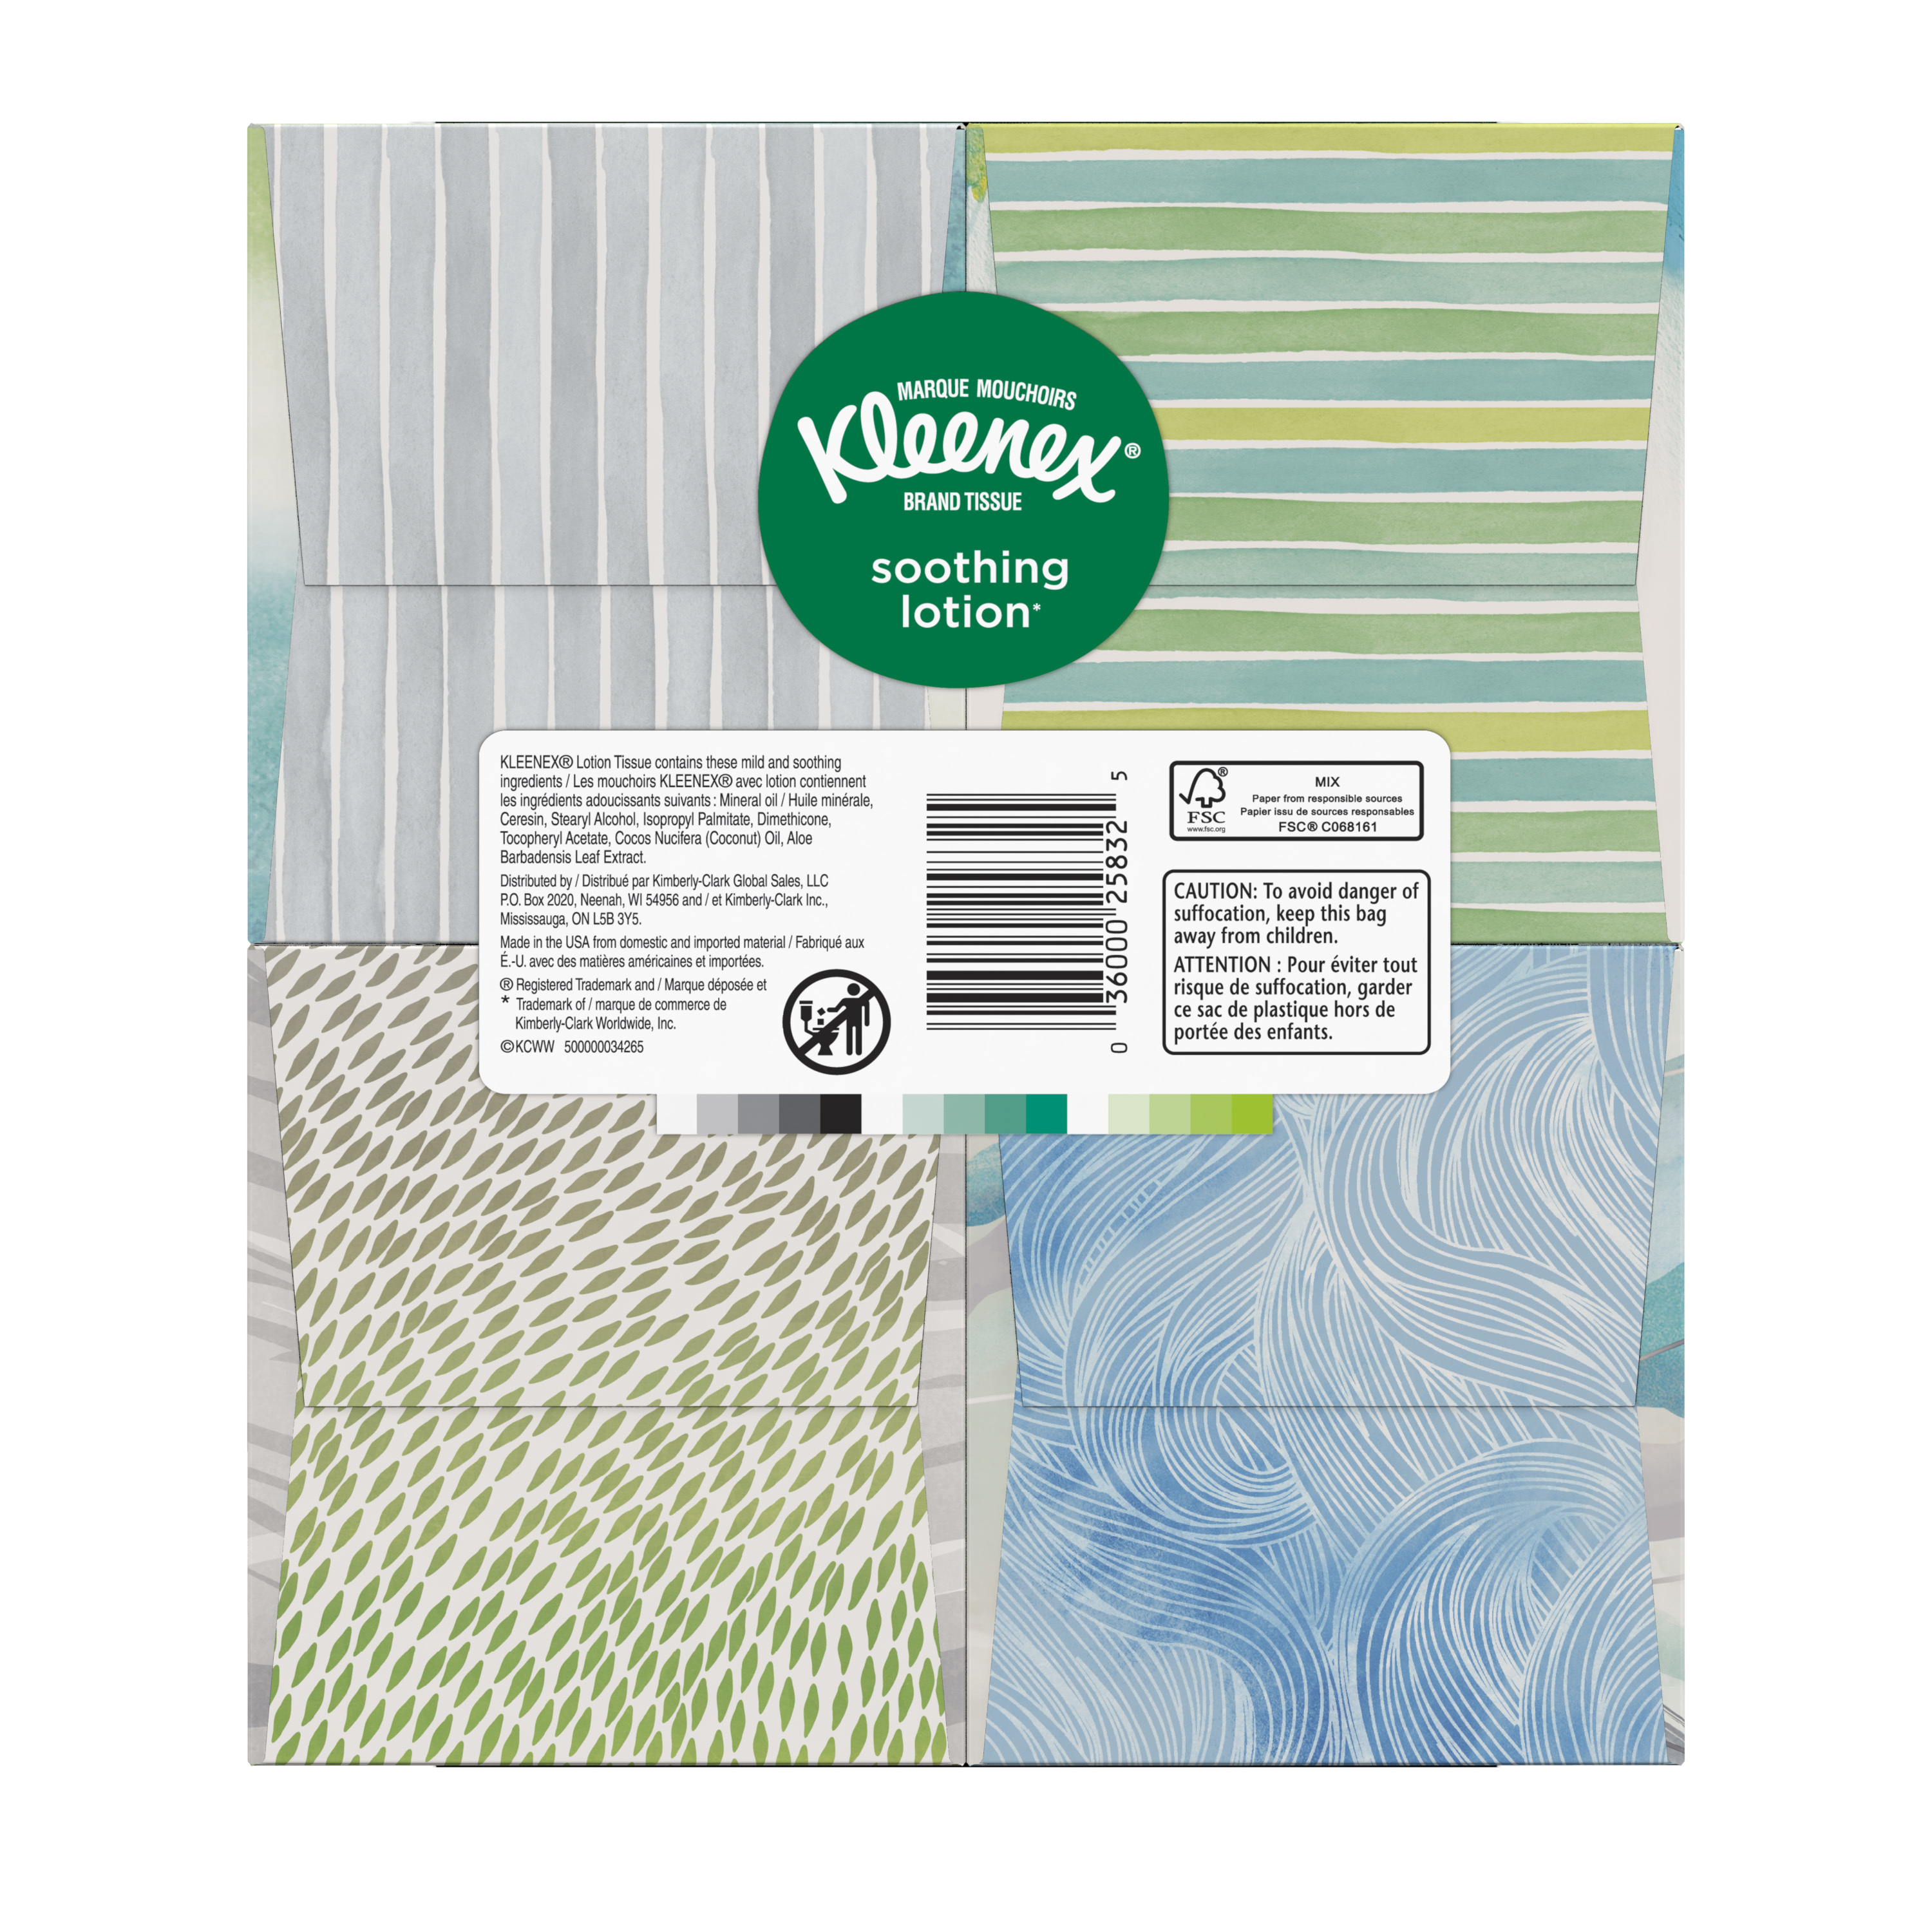 Kleenex Soothing Lotion Facial Tissues, 4 Cube Boxes, 75 White Tissues per Box, 3-Ply (300 Total Tissues) - image 3 of 4